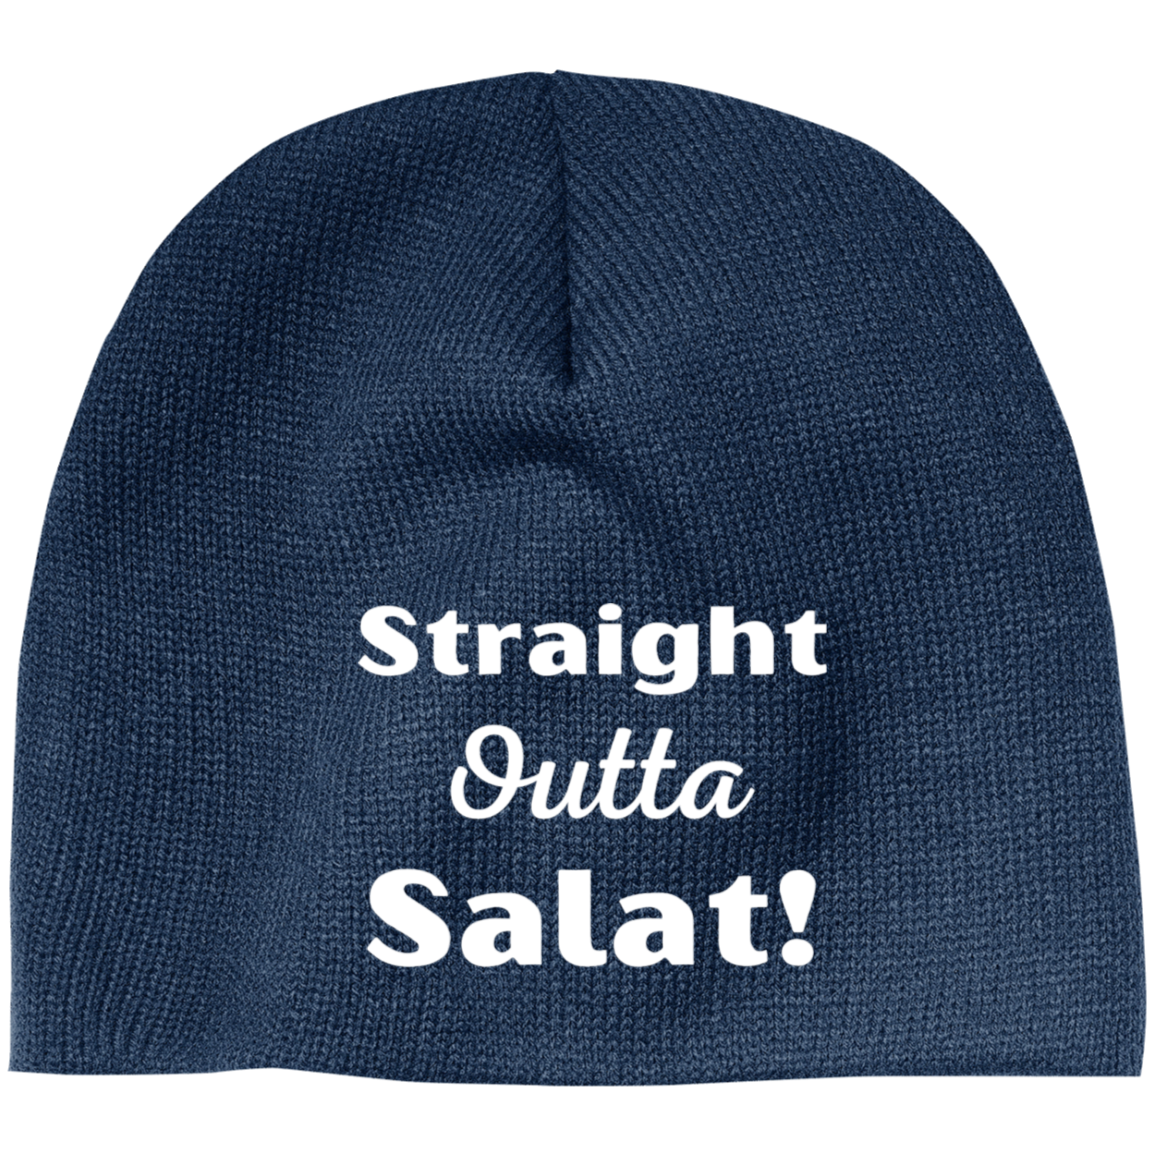 STRAIGHT OUTTA SALAT! Embroidered 100% Acrylic Beanie ( More Colors Options )